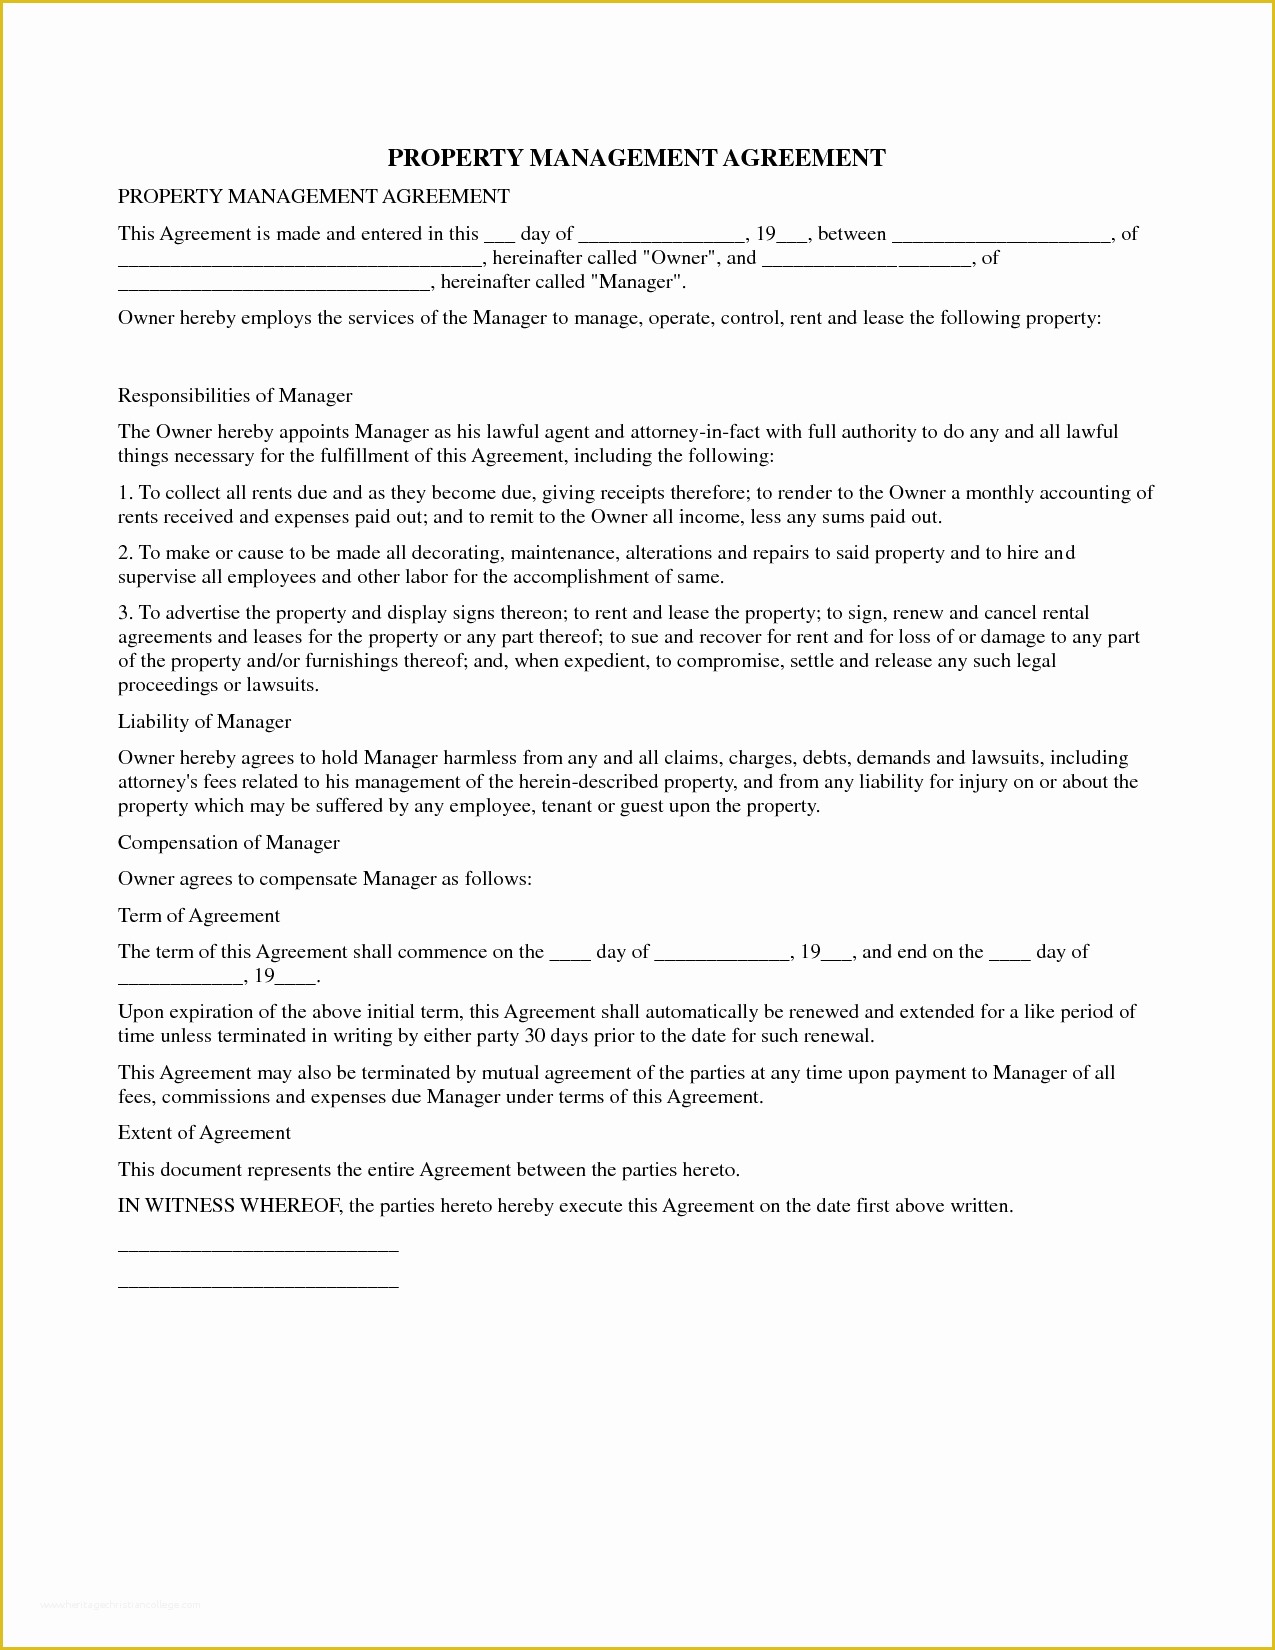 Property Management Agreement Template Free Of Property Management Contract forms Rental Docs Ez